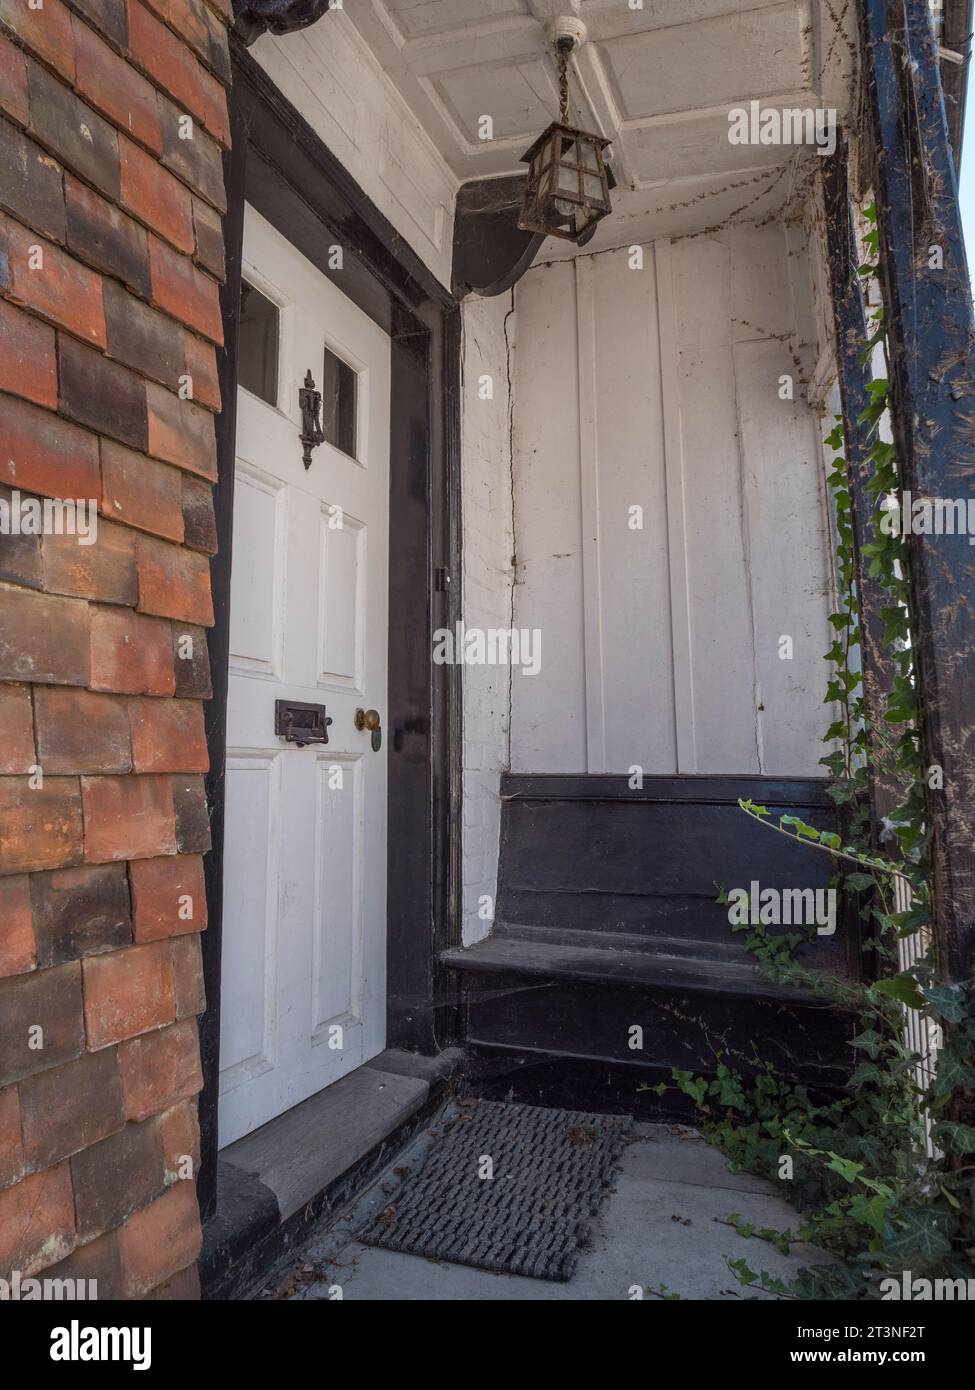 The House with the Seat, Mermaid Street, Rye, East Sussex, UK. Foto Stock